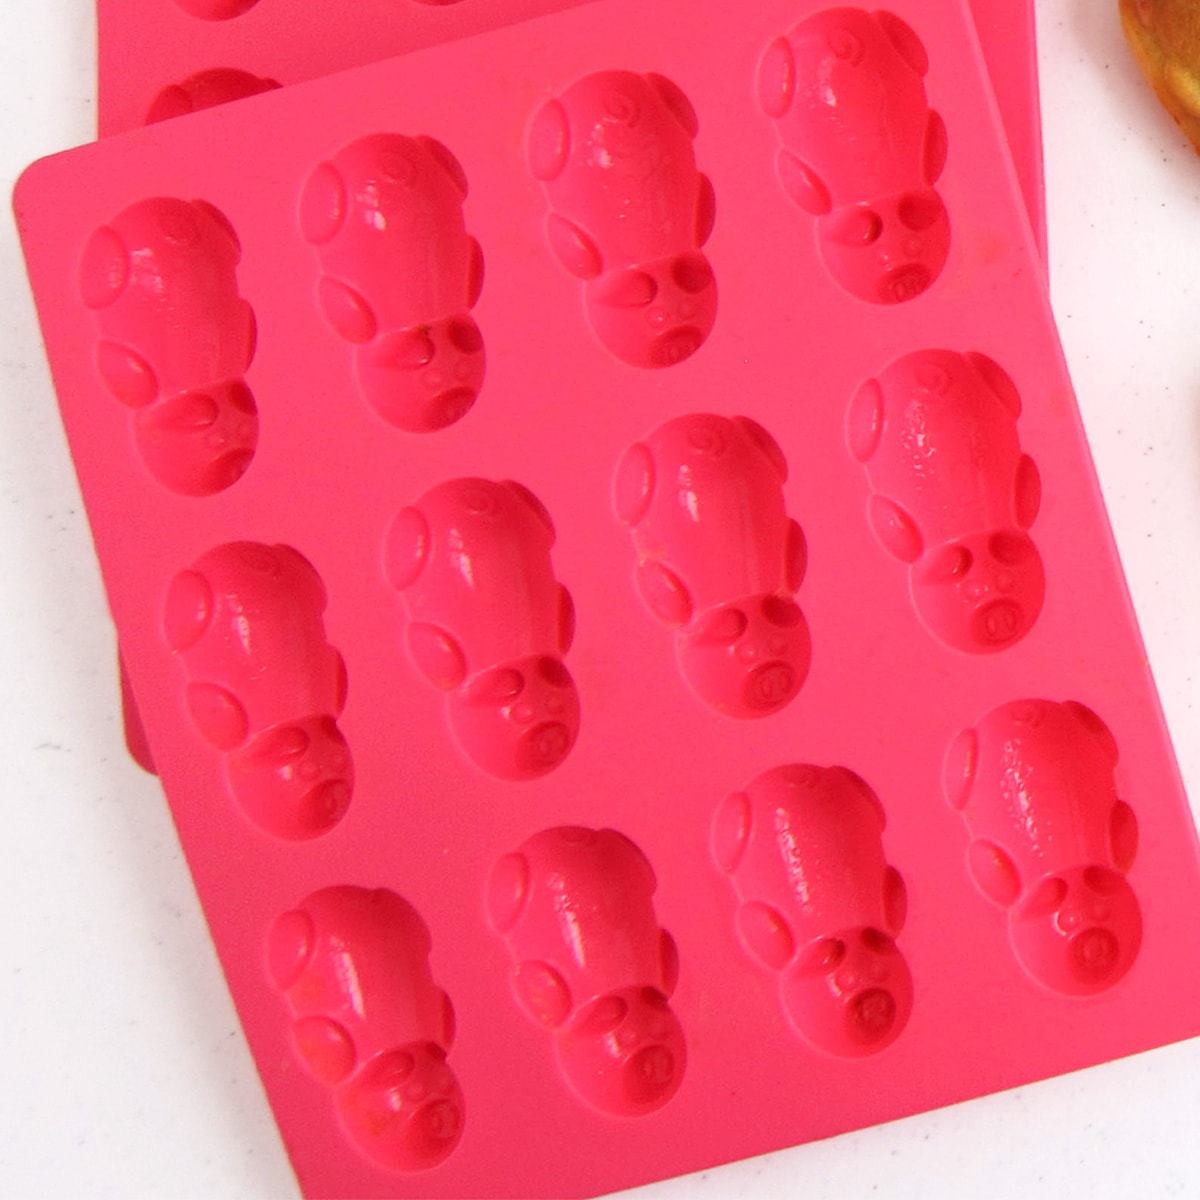 Silicone pig mold for pigs in a blanket pancakes.